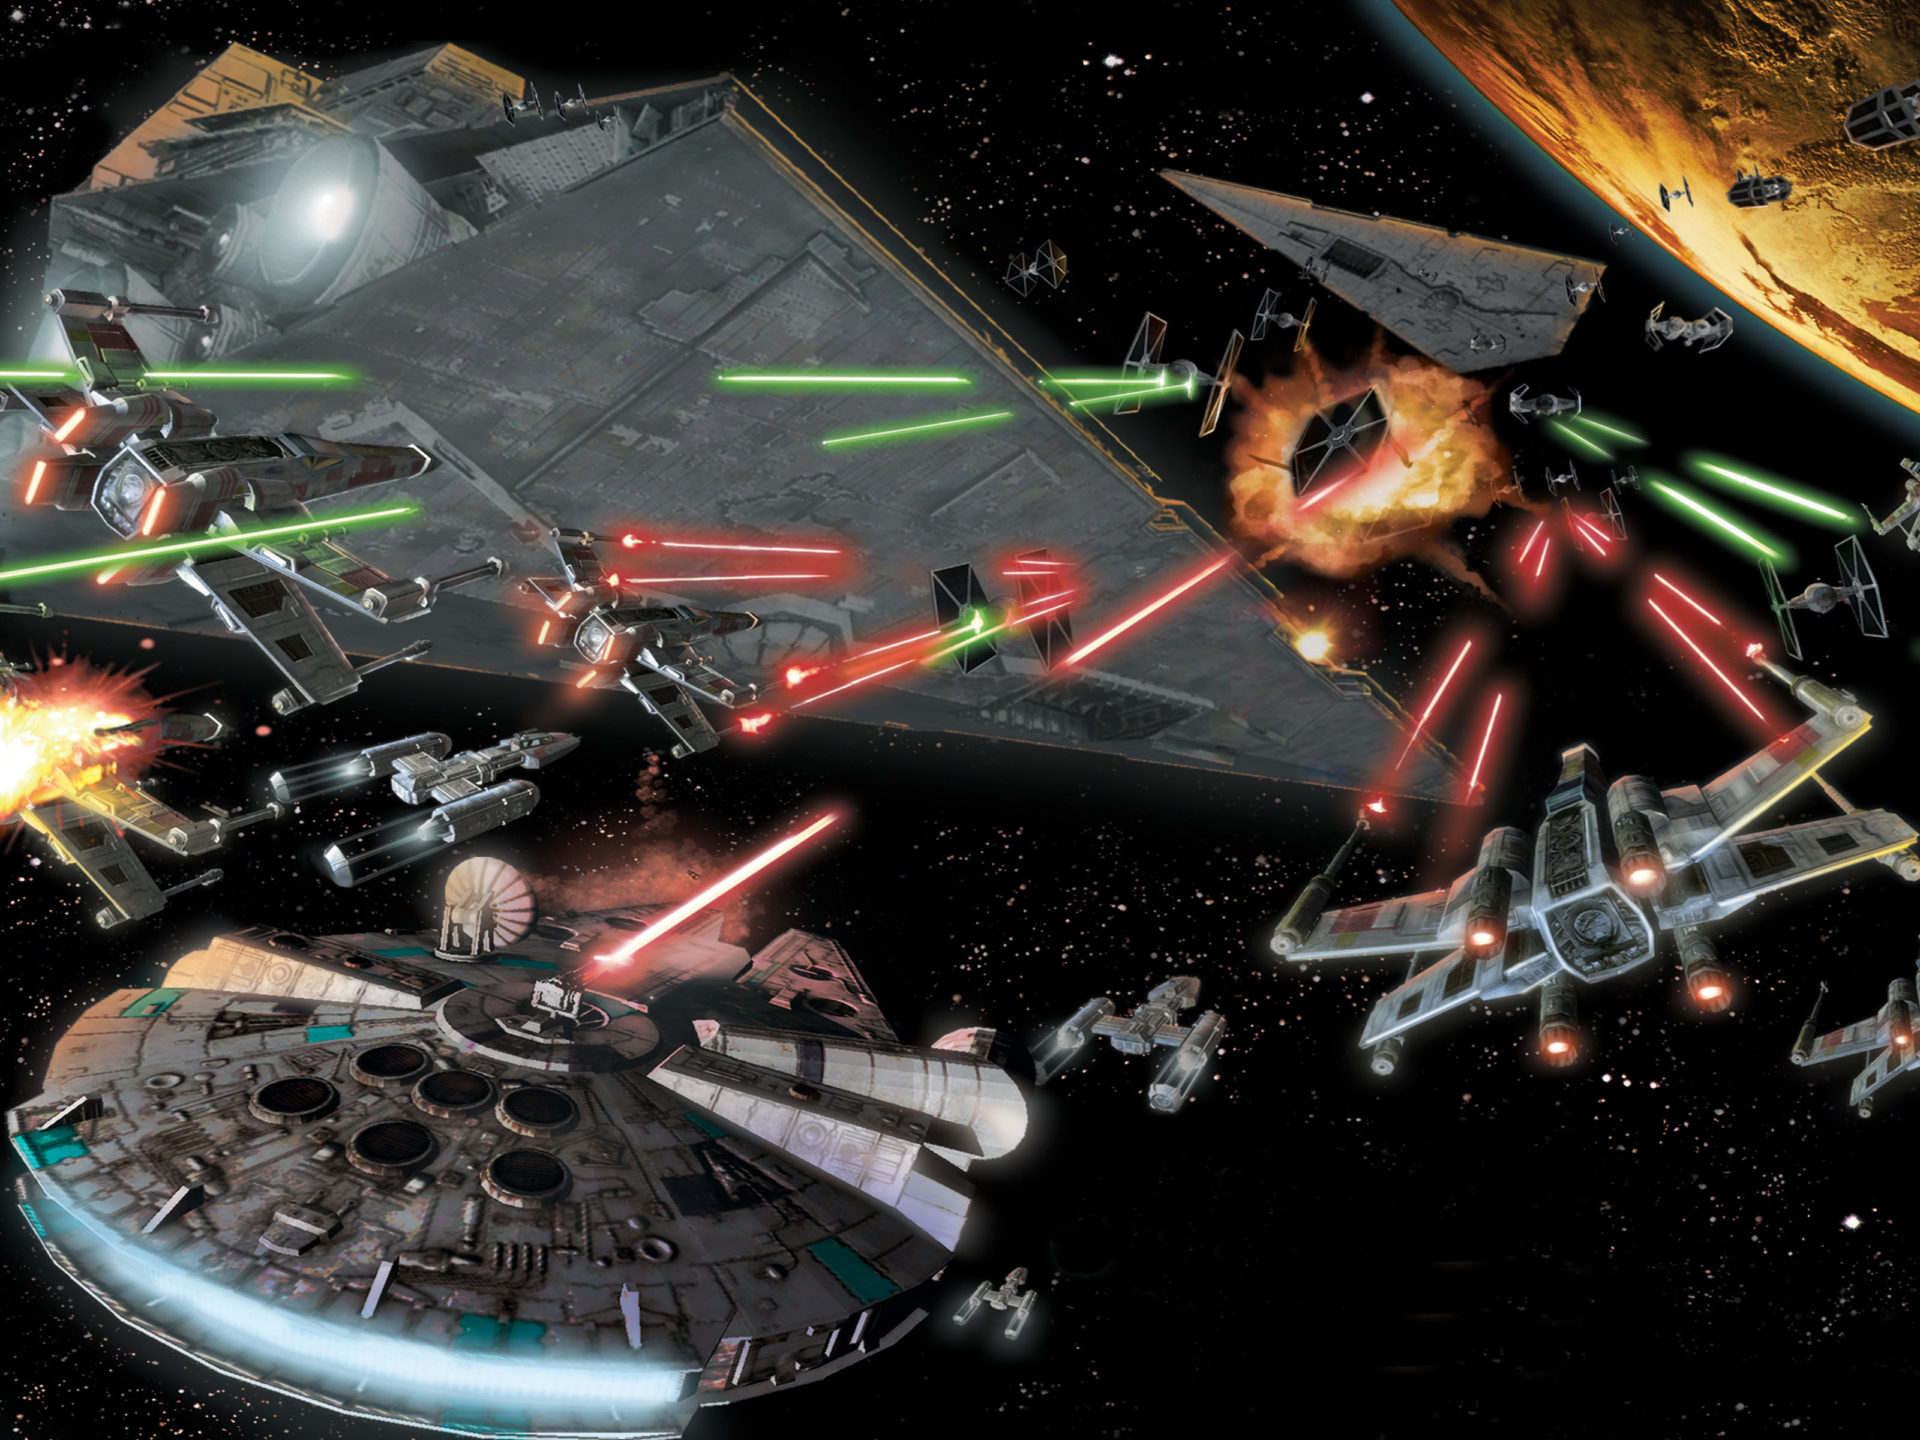 Star Wars Space Battle In Space Space Combat Aircraft Laser Shots Adventure Film Video Games, Wallpaper13.com